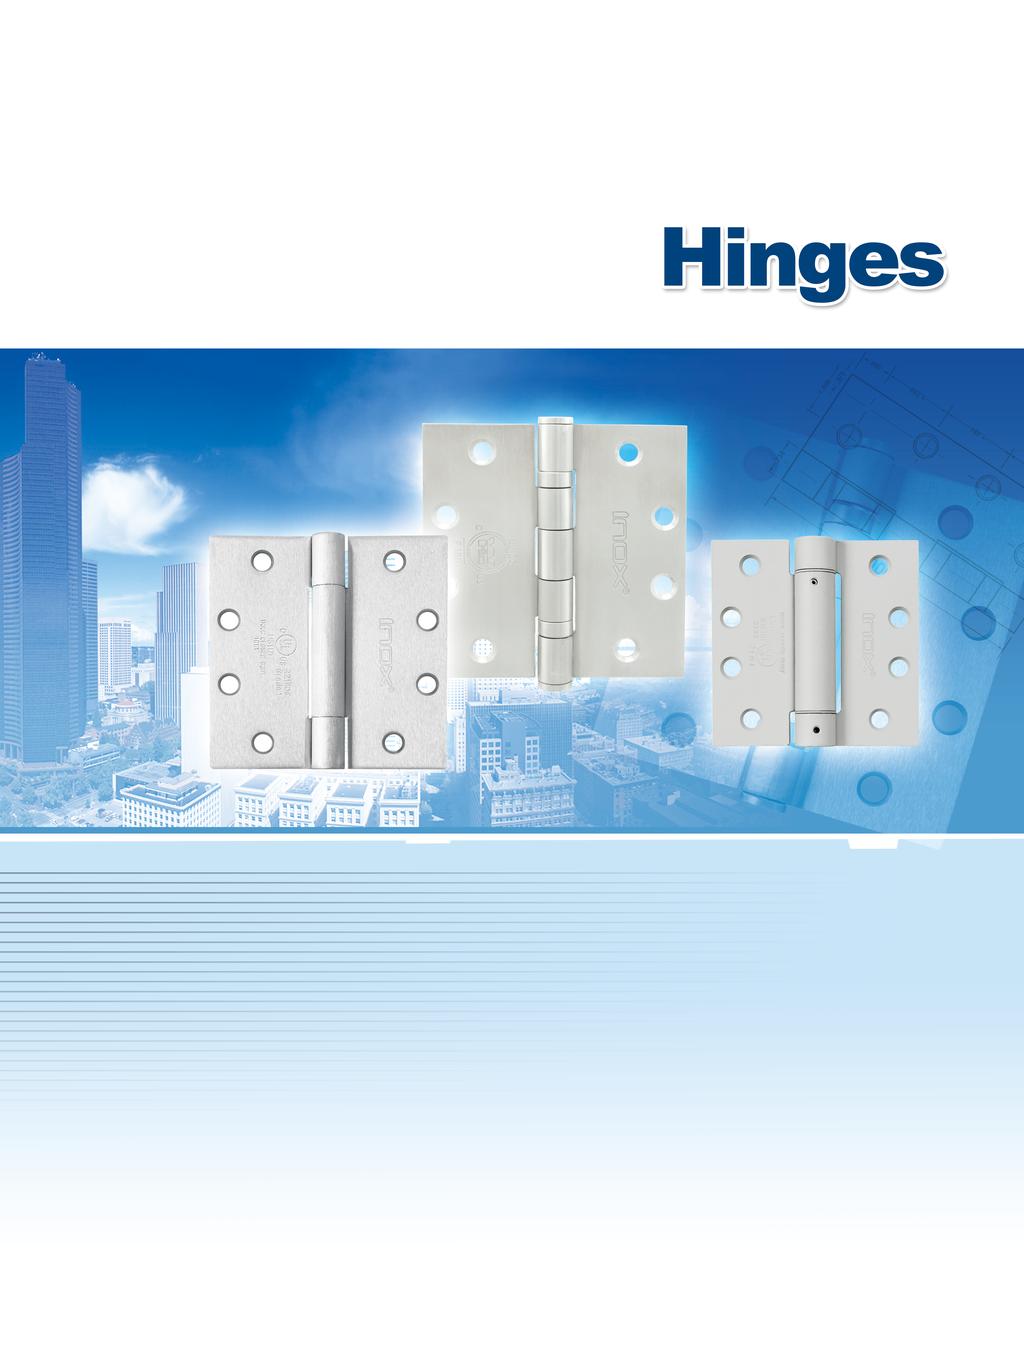 GRADE 1 & GRADE 2 HINGES Division 8 10 YEAR WARRANTY BHMA/ANSI A156.